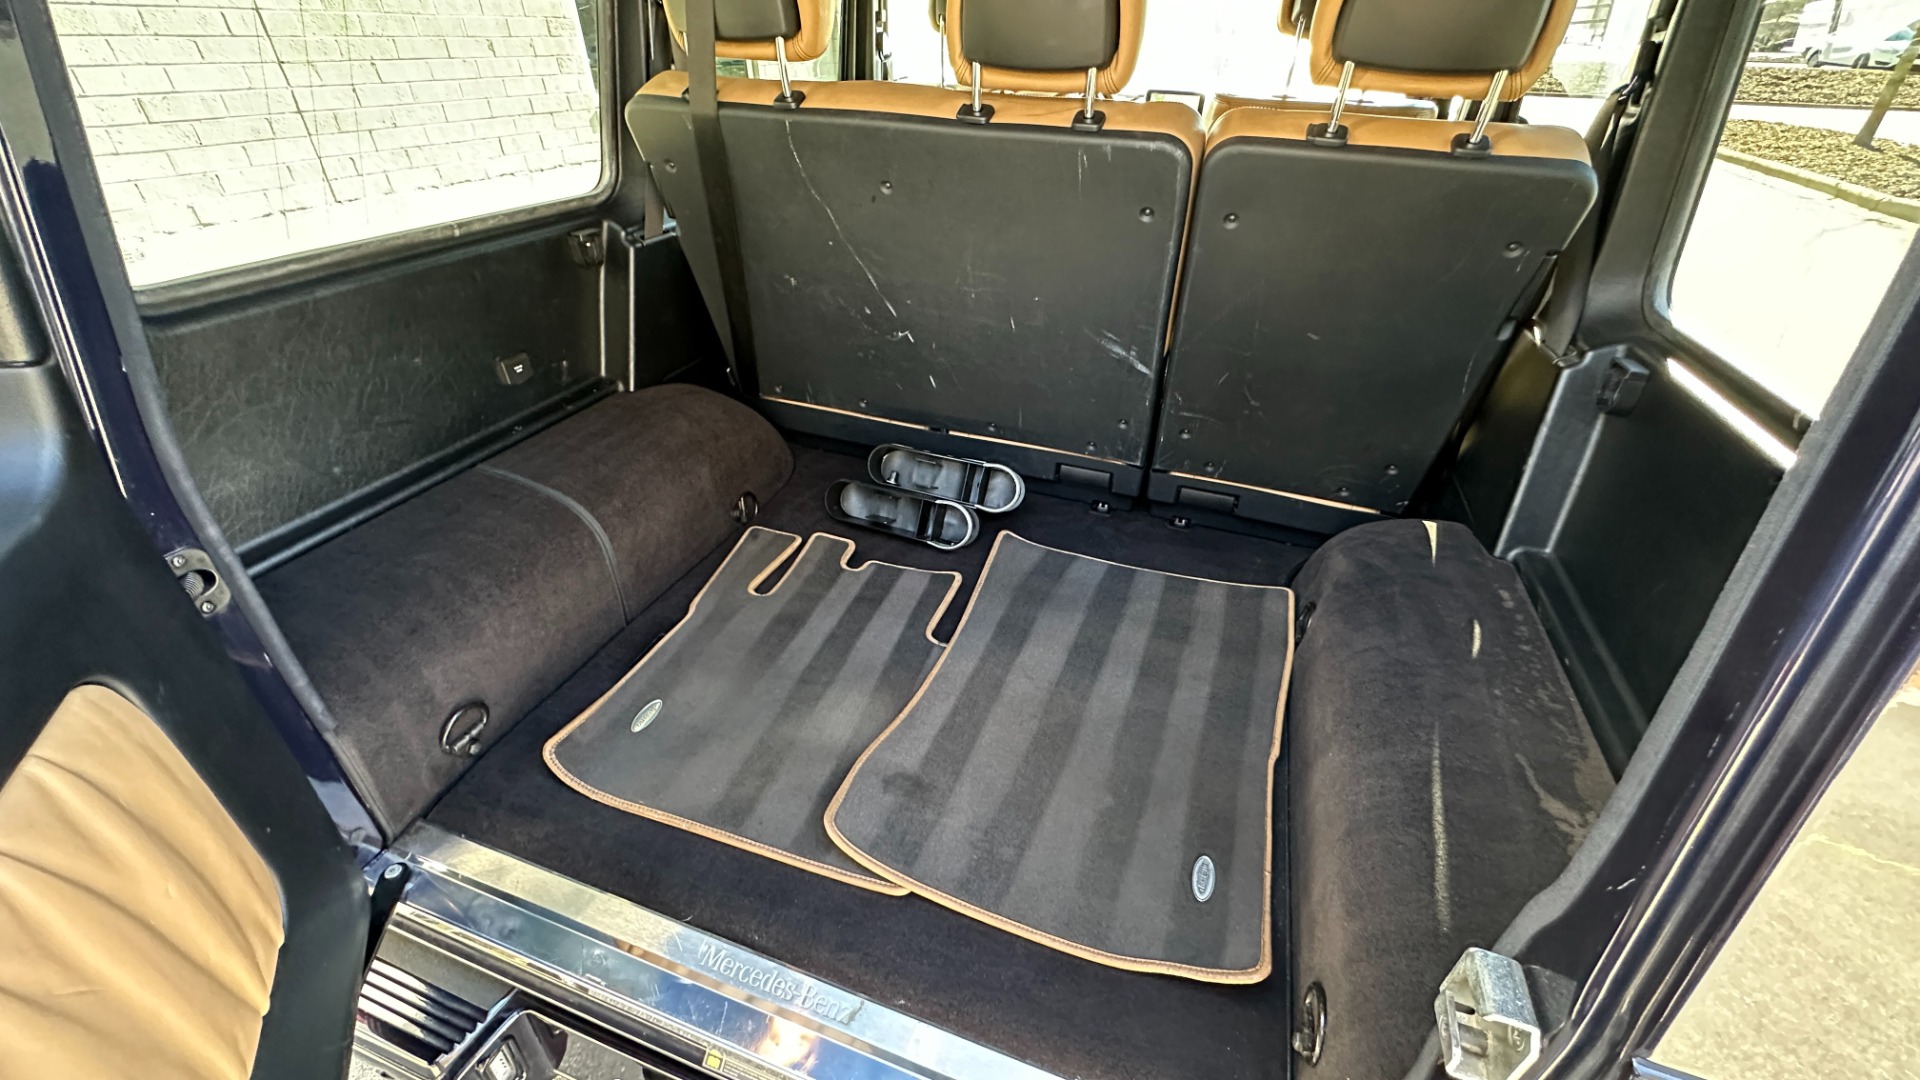 Used 2015 Mercedes-Benz G-Class G550 / DESIGNO NAPPA LEATHER / DESIGNO HEADLINER / HEATED STEERING / NAV /  for sale Sold at Formula Imports in Charlotte NC 28227 39